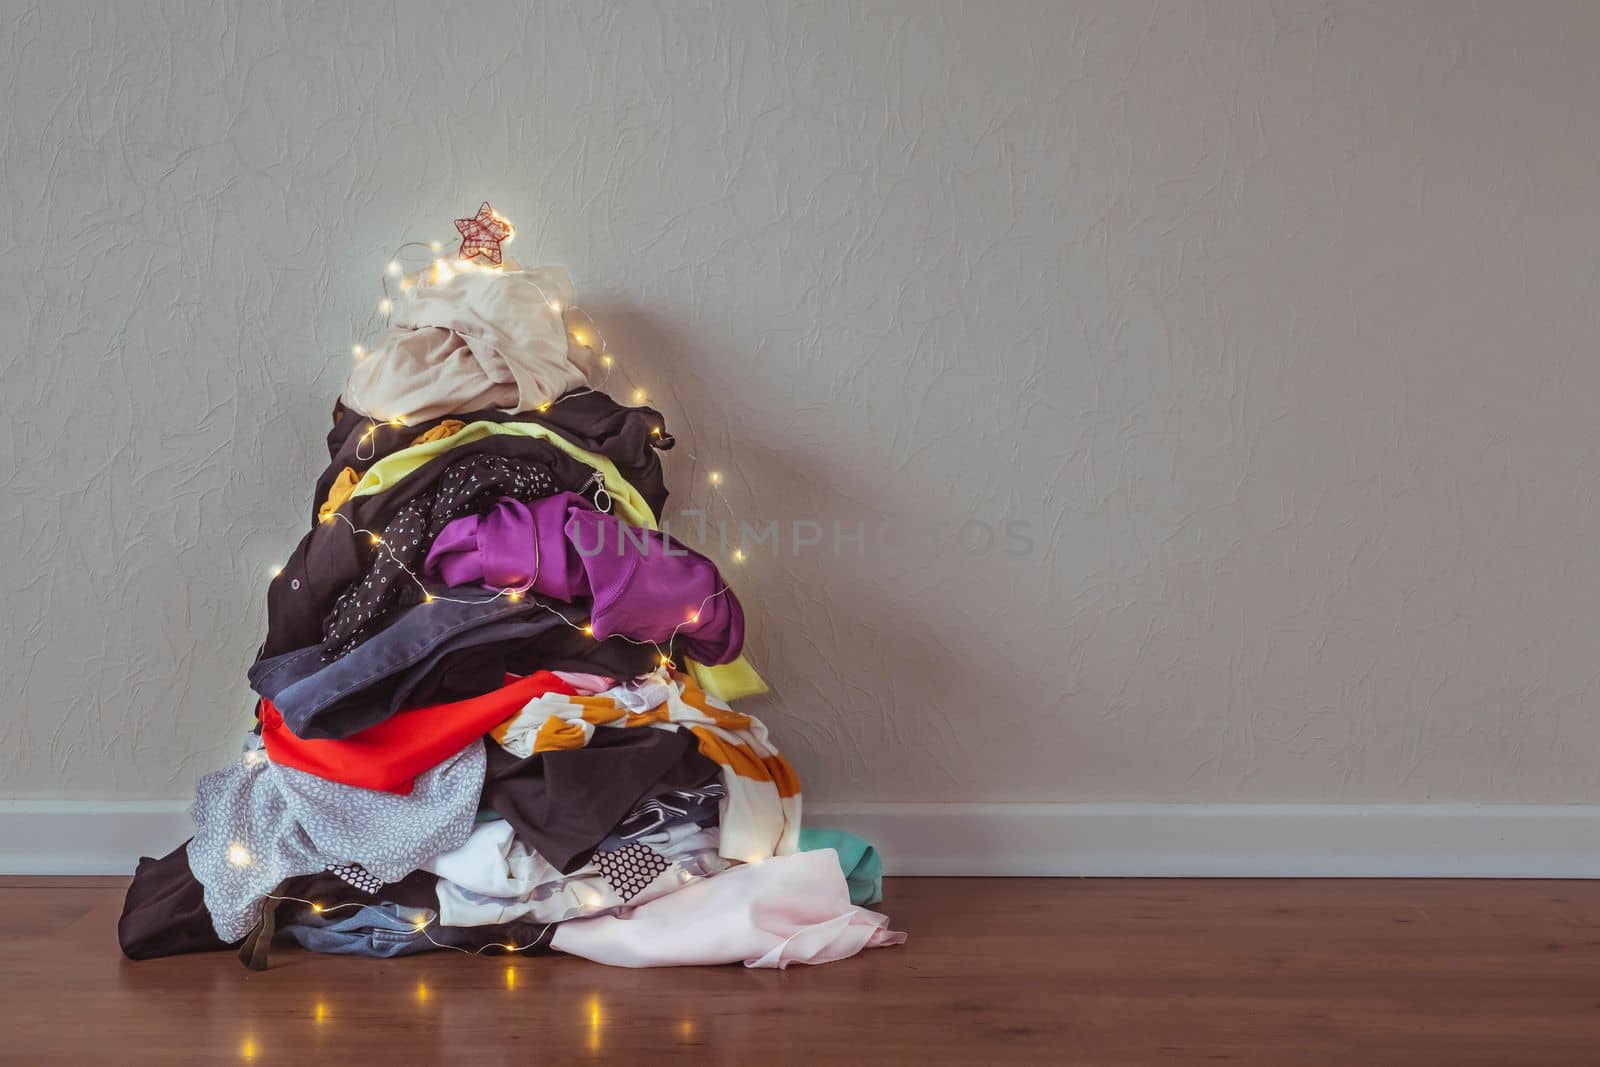 A pile of clothes in the shape of a Christmas tree.